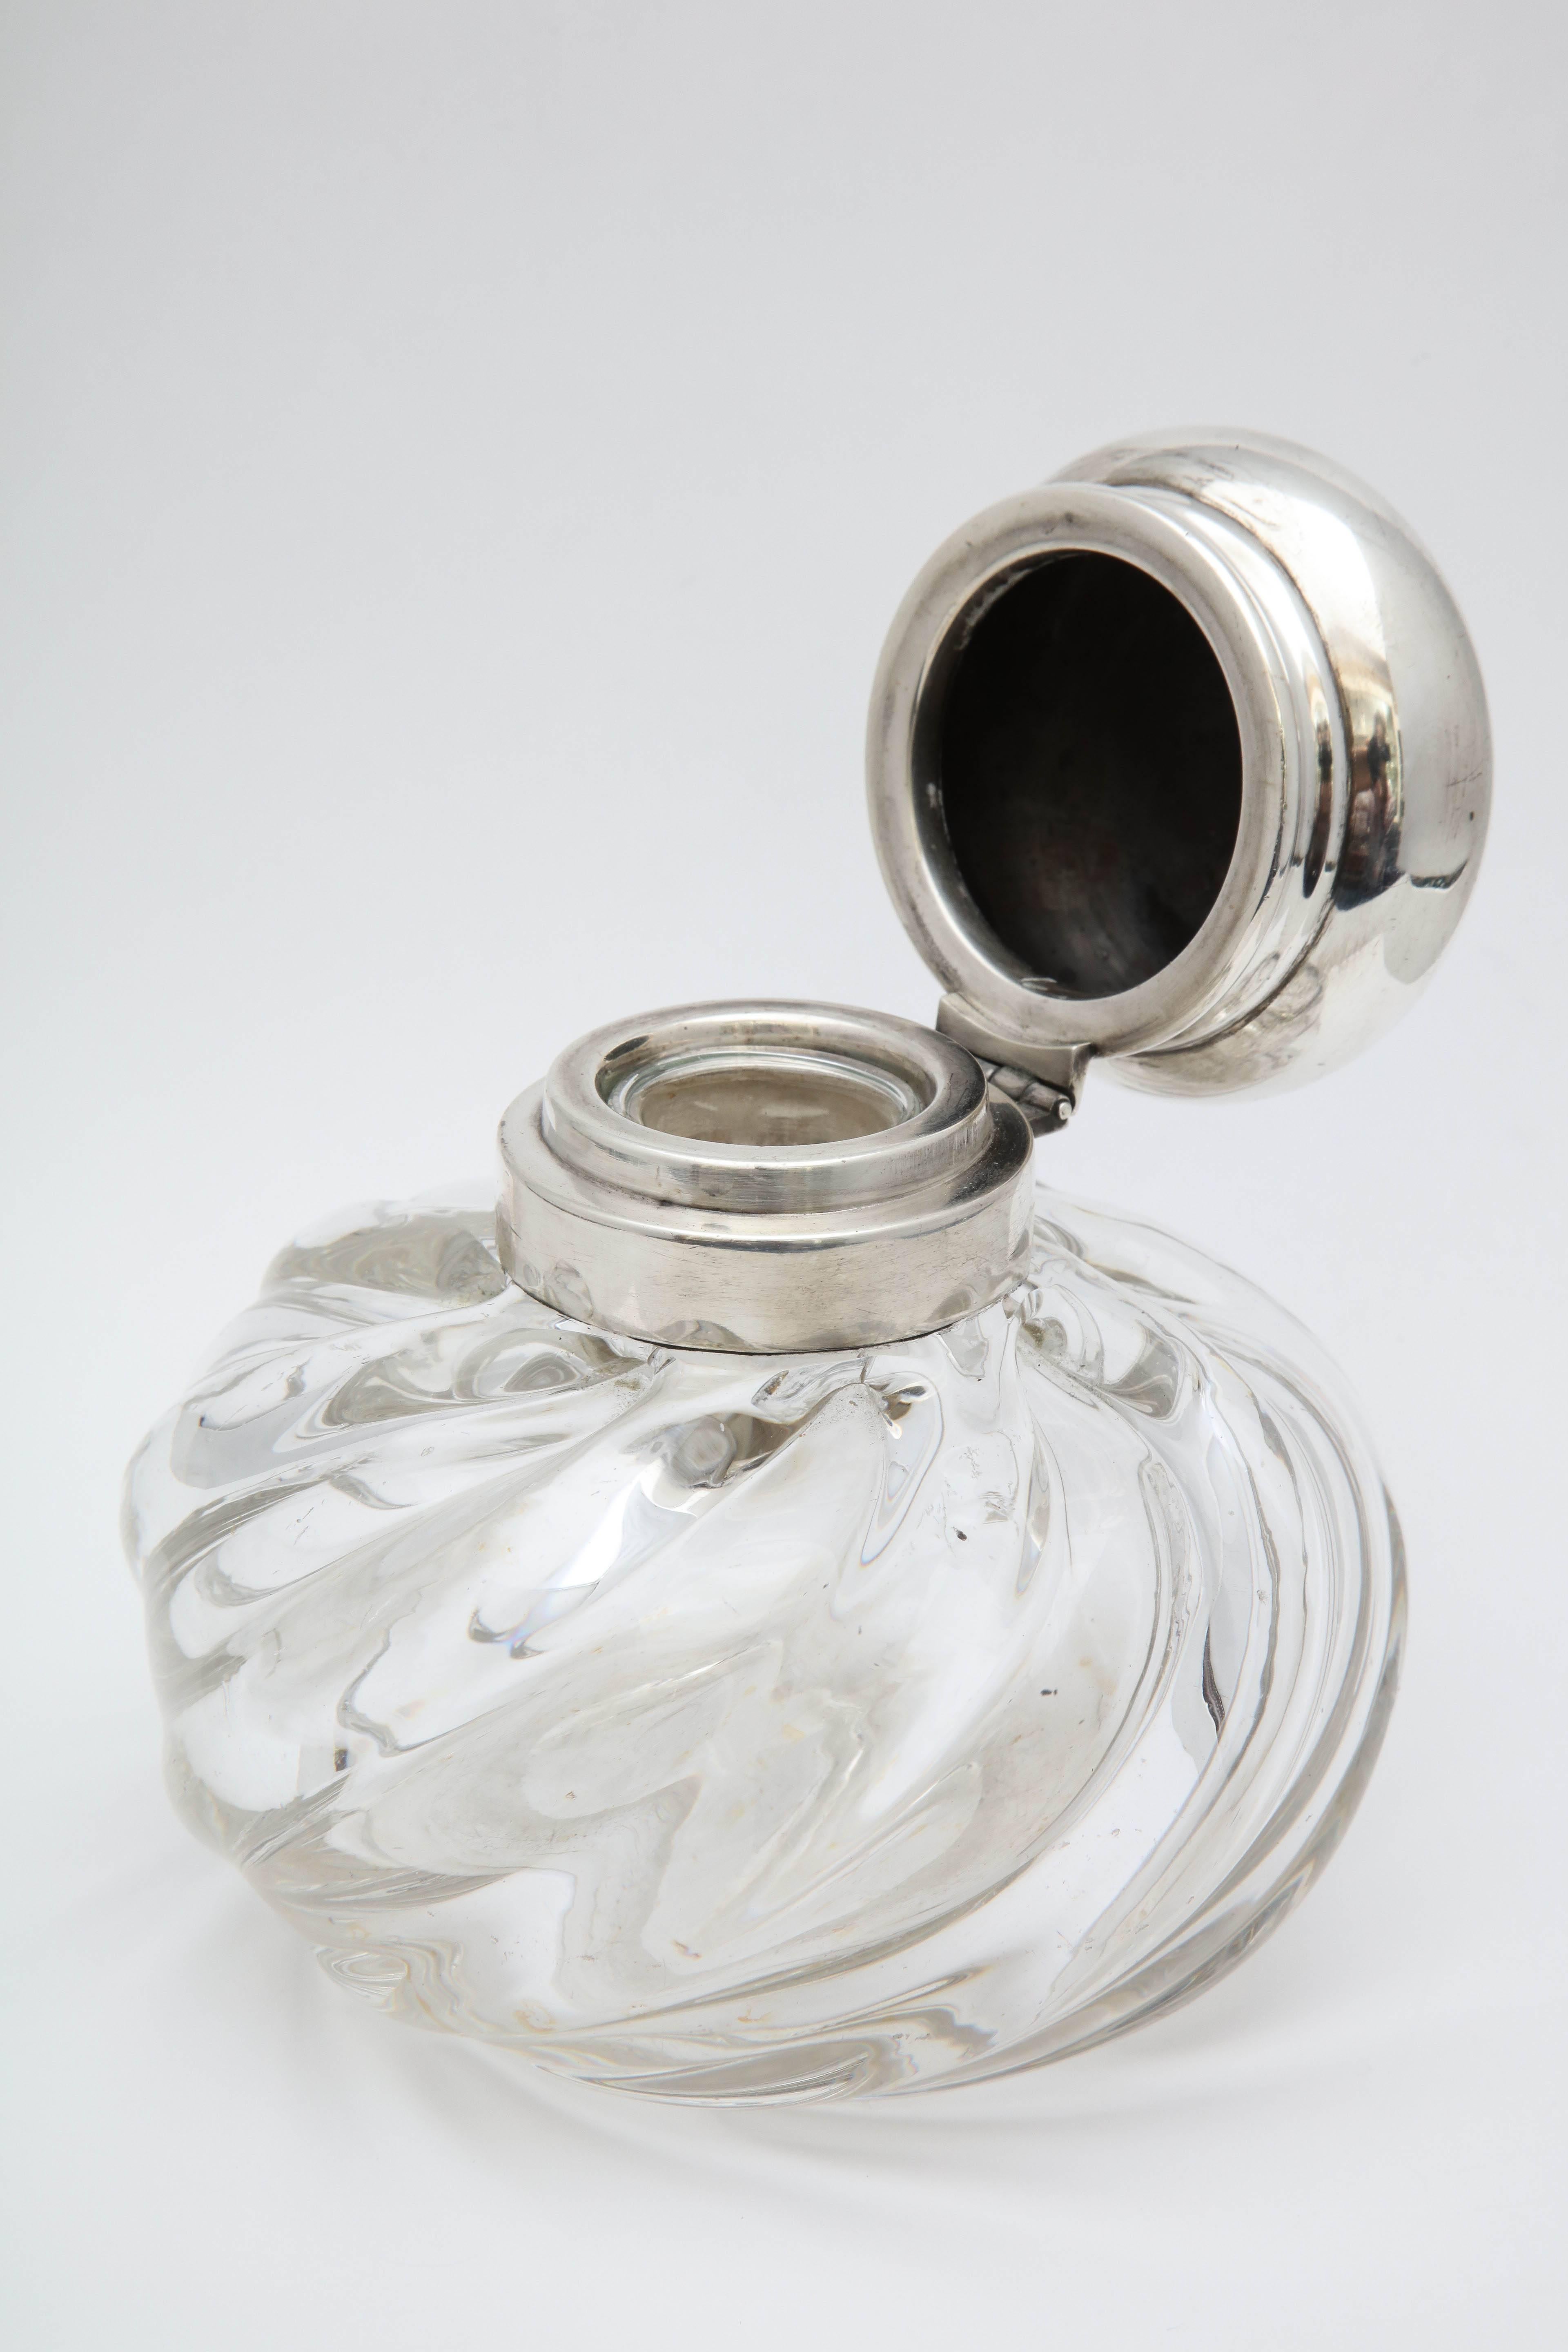 Large, Victorian, sterling silver mounted inkwell, Birmingham, England, 1897, Heath and Middleton (John Thomas Heath and John Hartshorne Middleton) makers. Crystal is swirled in design. Measures 5 inches high x 5 inches in diameter at widest point.